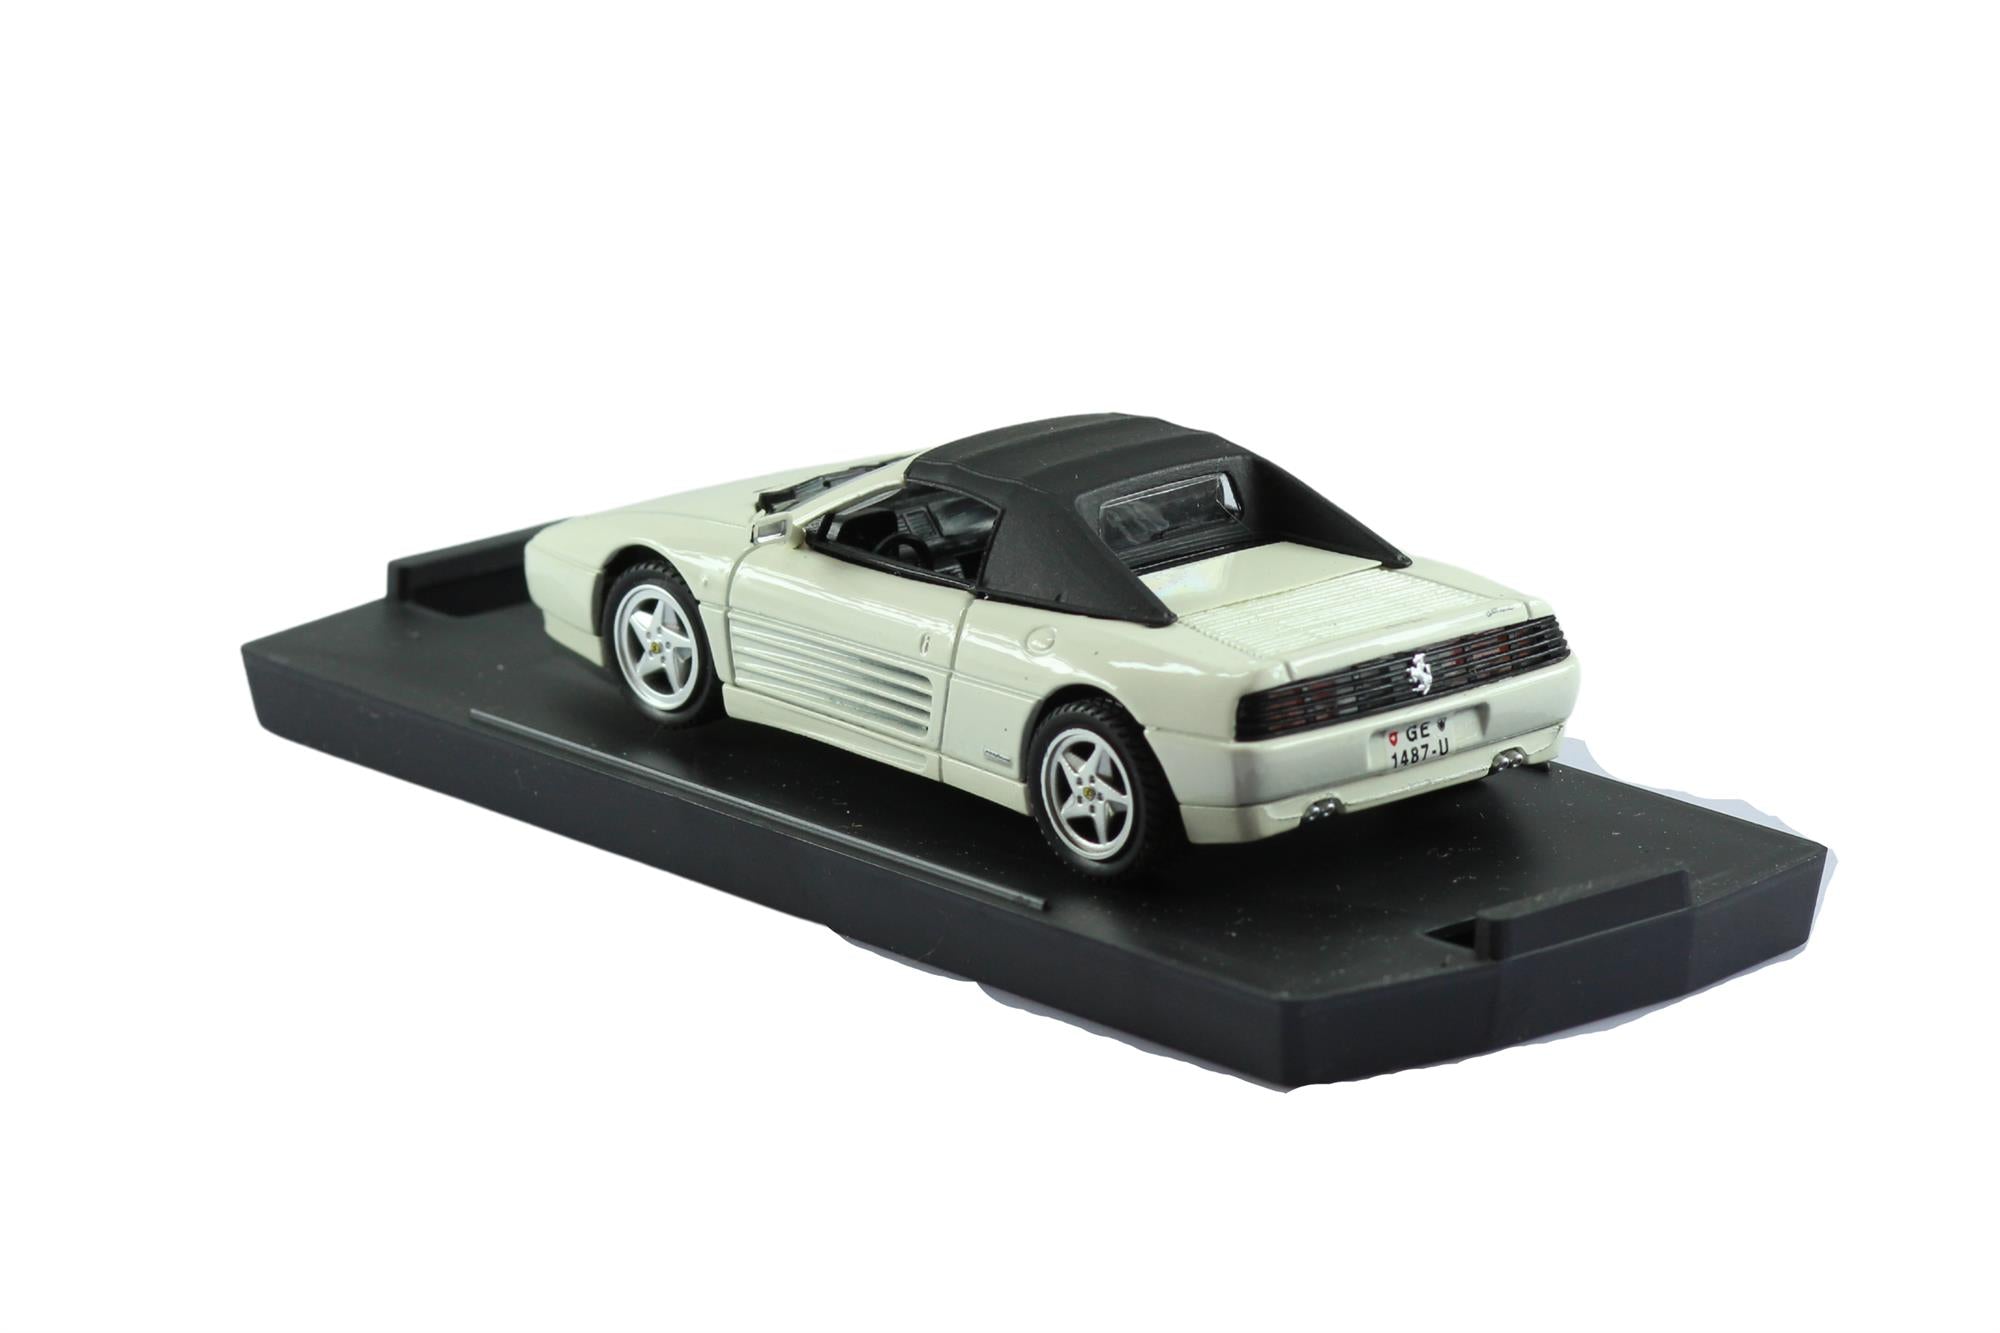 Bang Models - 1:43 Scale Diecast Ferrari 348 Spider in White - Made in Italy - Toptoys2u